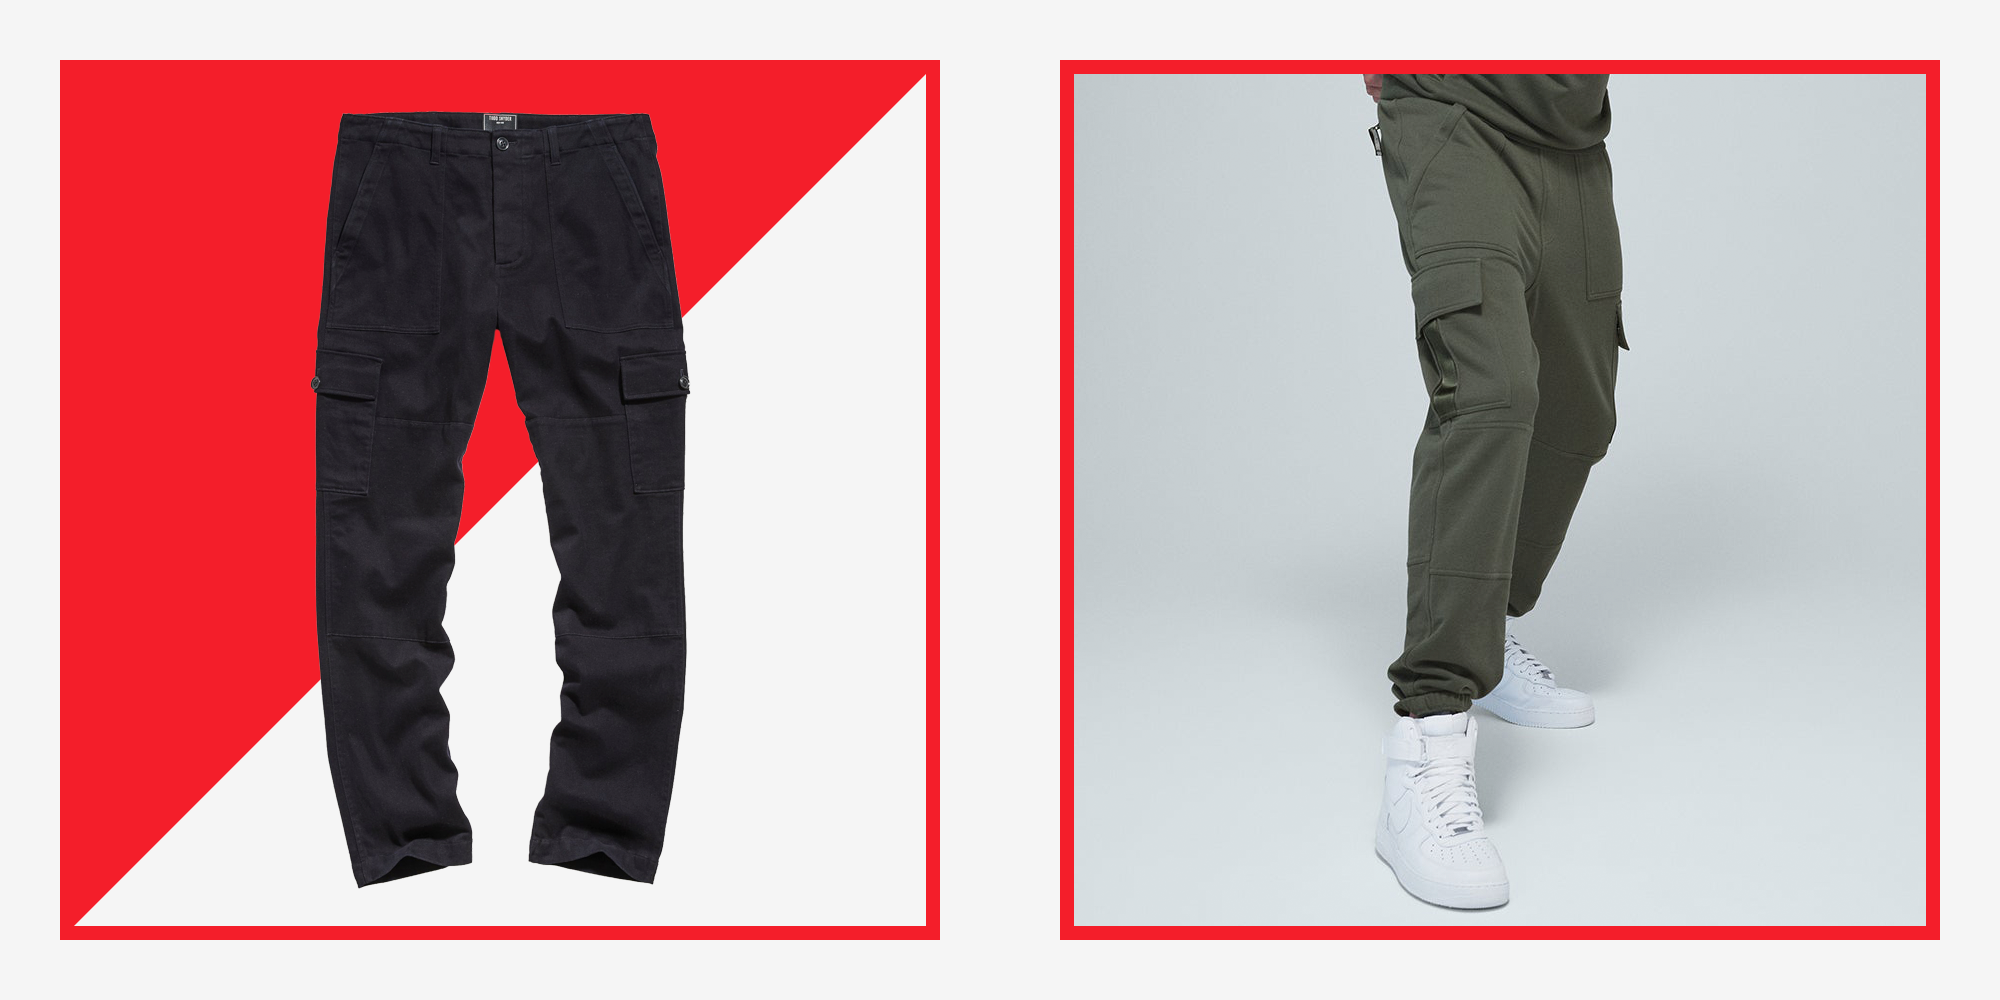 Cargo Pants Outfit Guide: The Best Men's Style Ideas